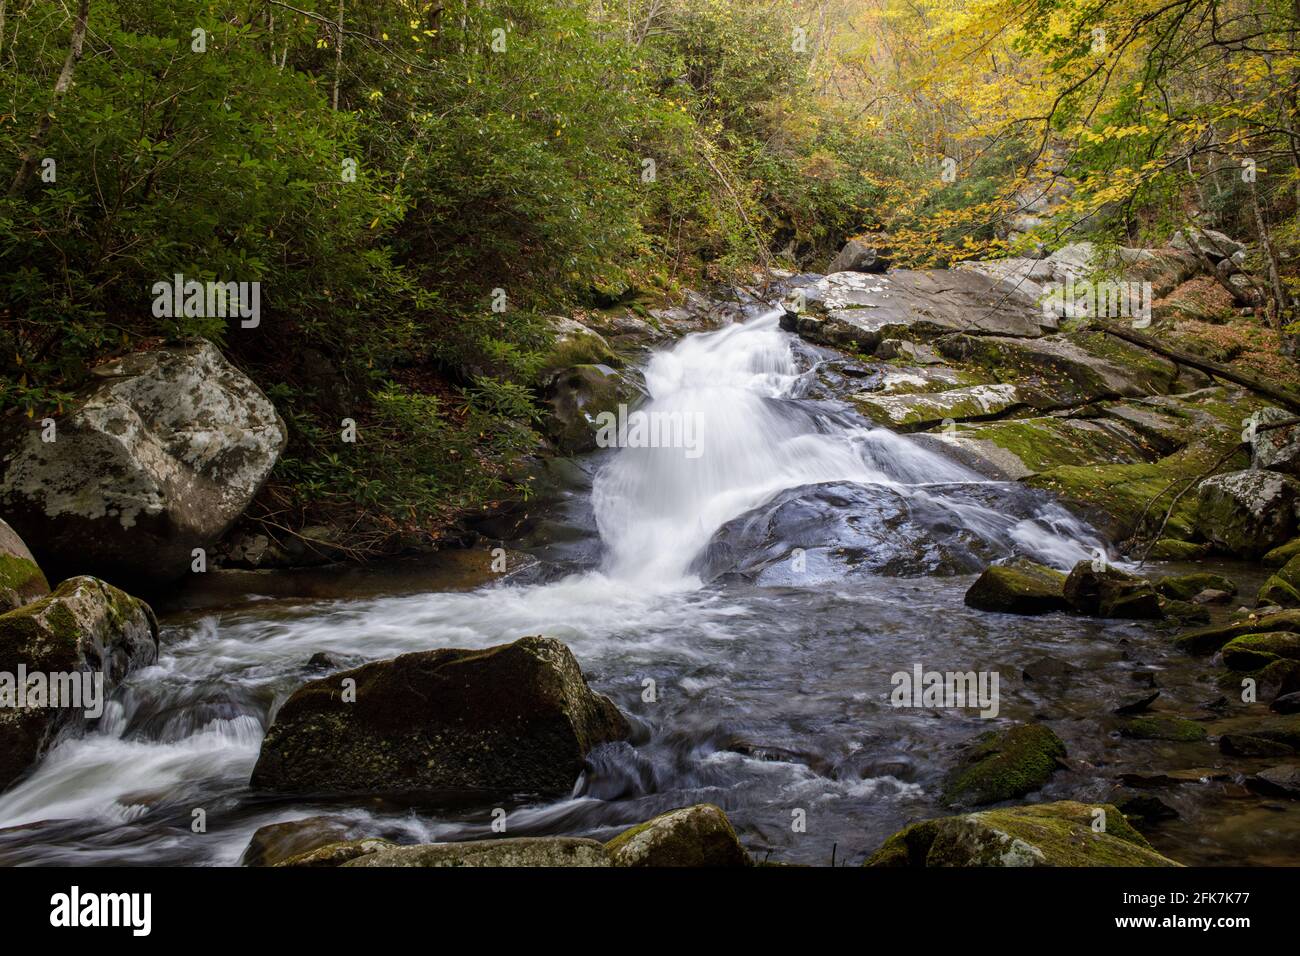 Autumn Color, Great Smoky Mountain National Park. Autumn foliage along Lynn Camp Prong in the Tremont area of the Great Smoky Mountain National Park n Stock Photo